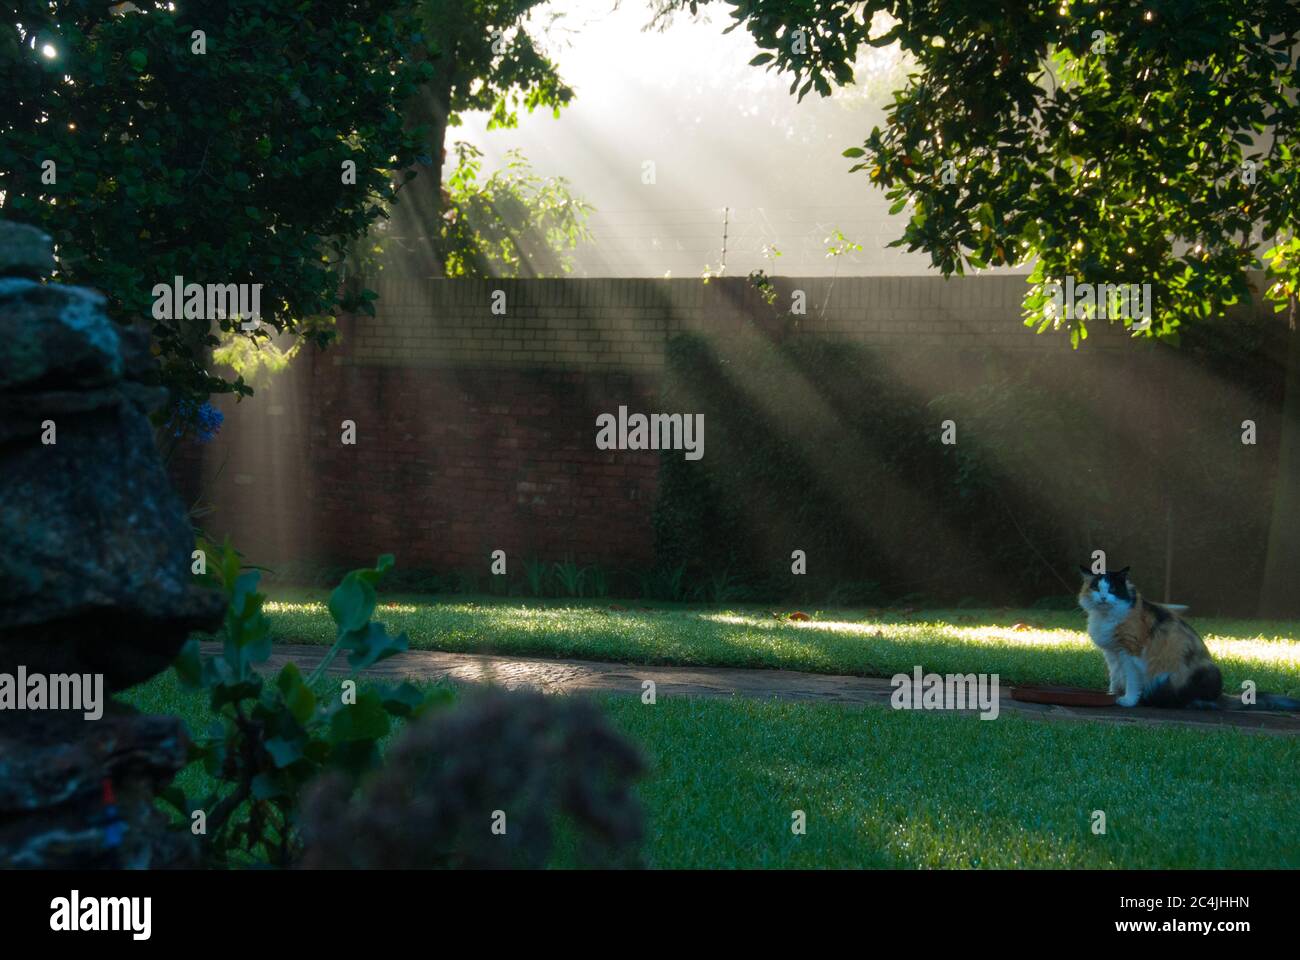 The sunbeam illusion or crepuscular rays breaking through the trees with a Calico cat looking at the camera. Stock Photo